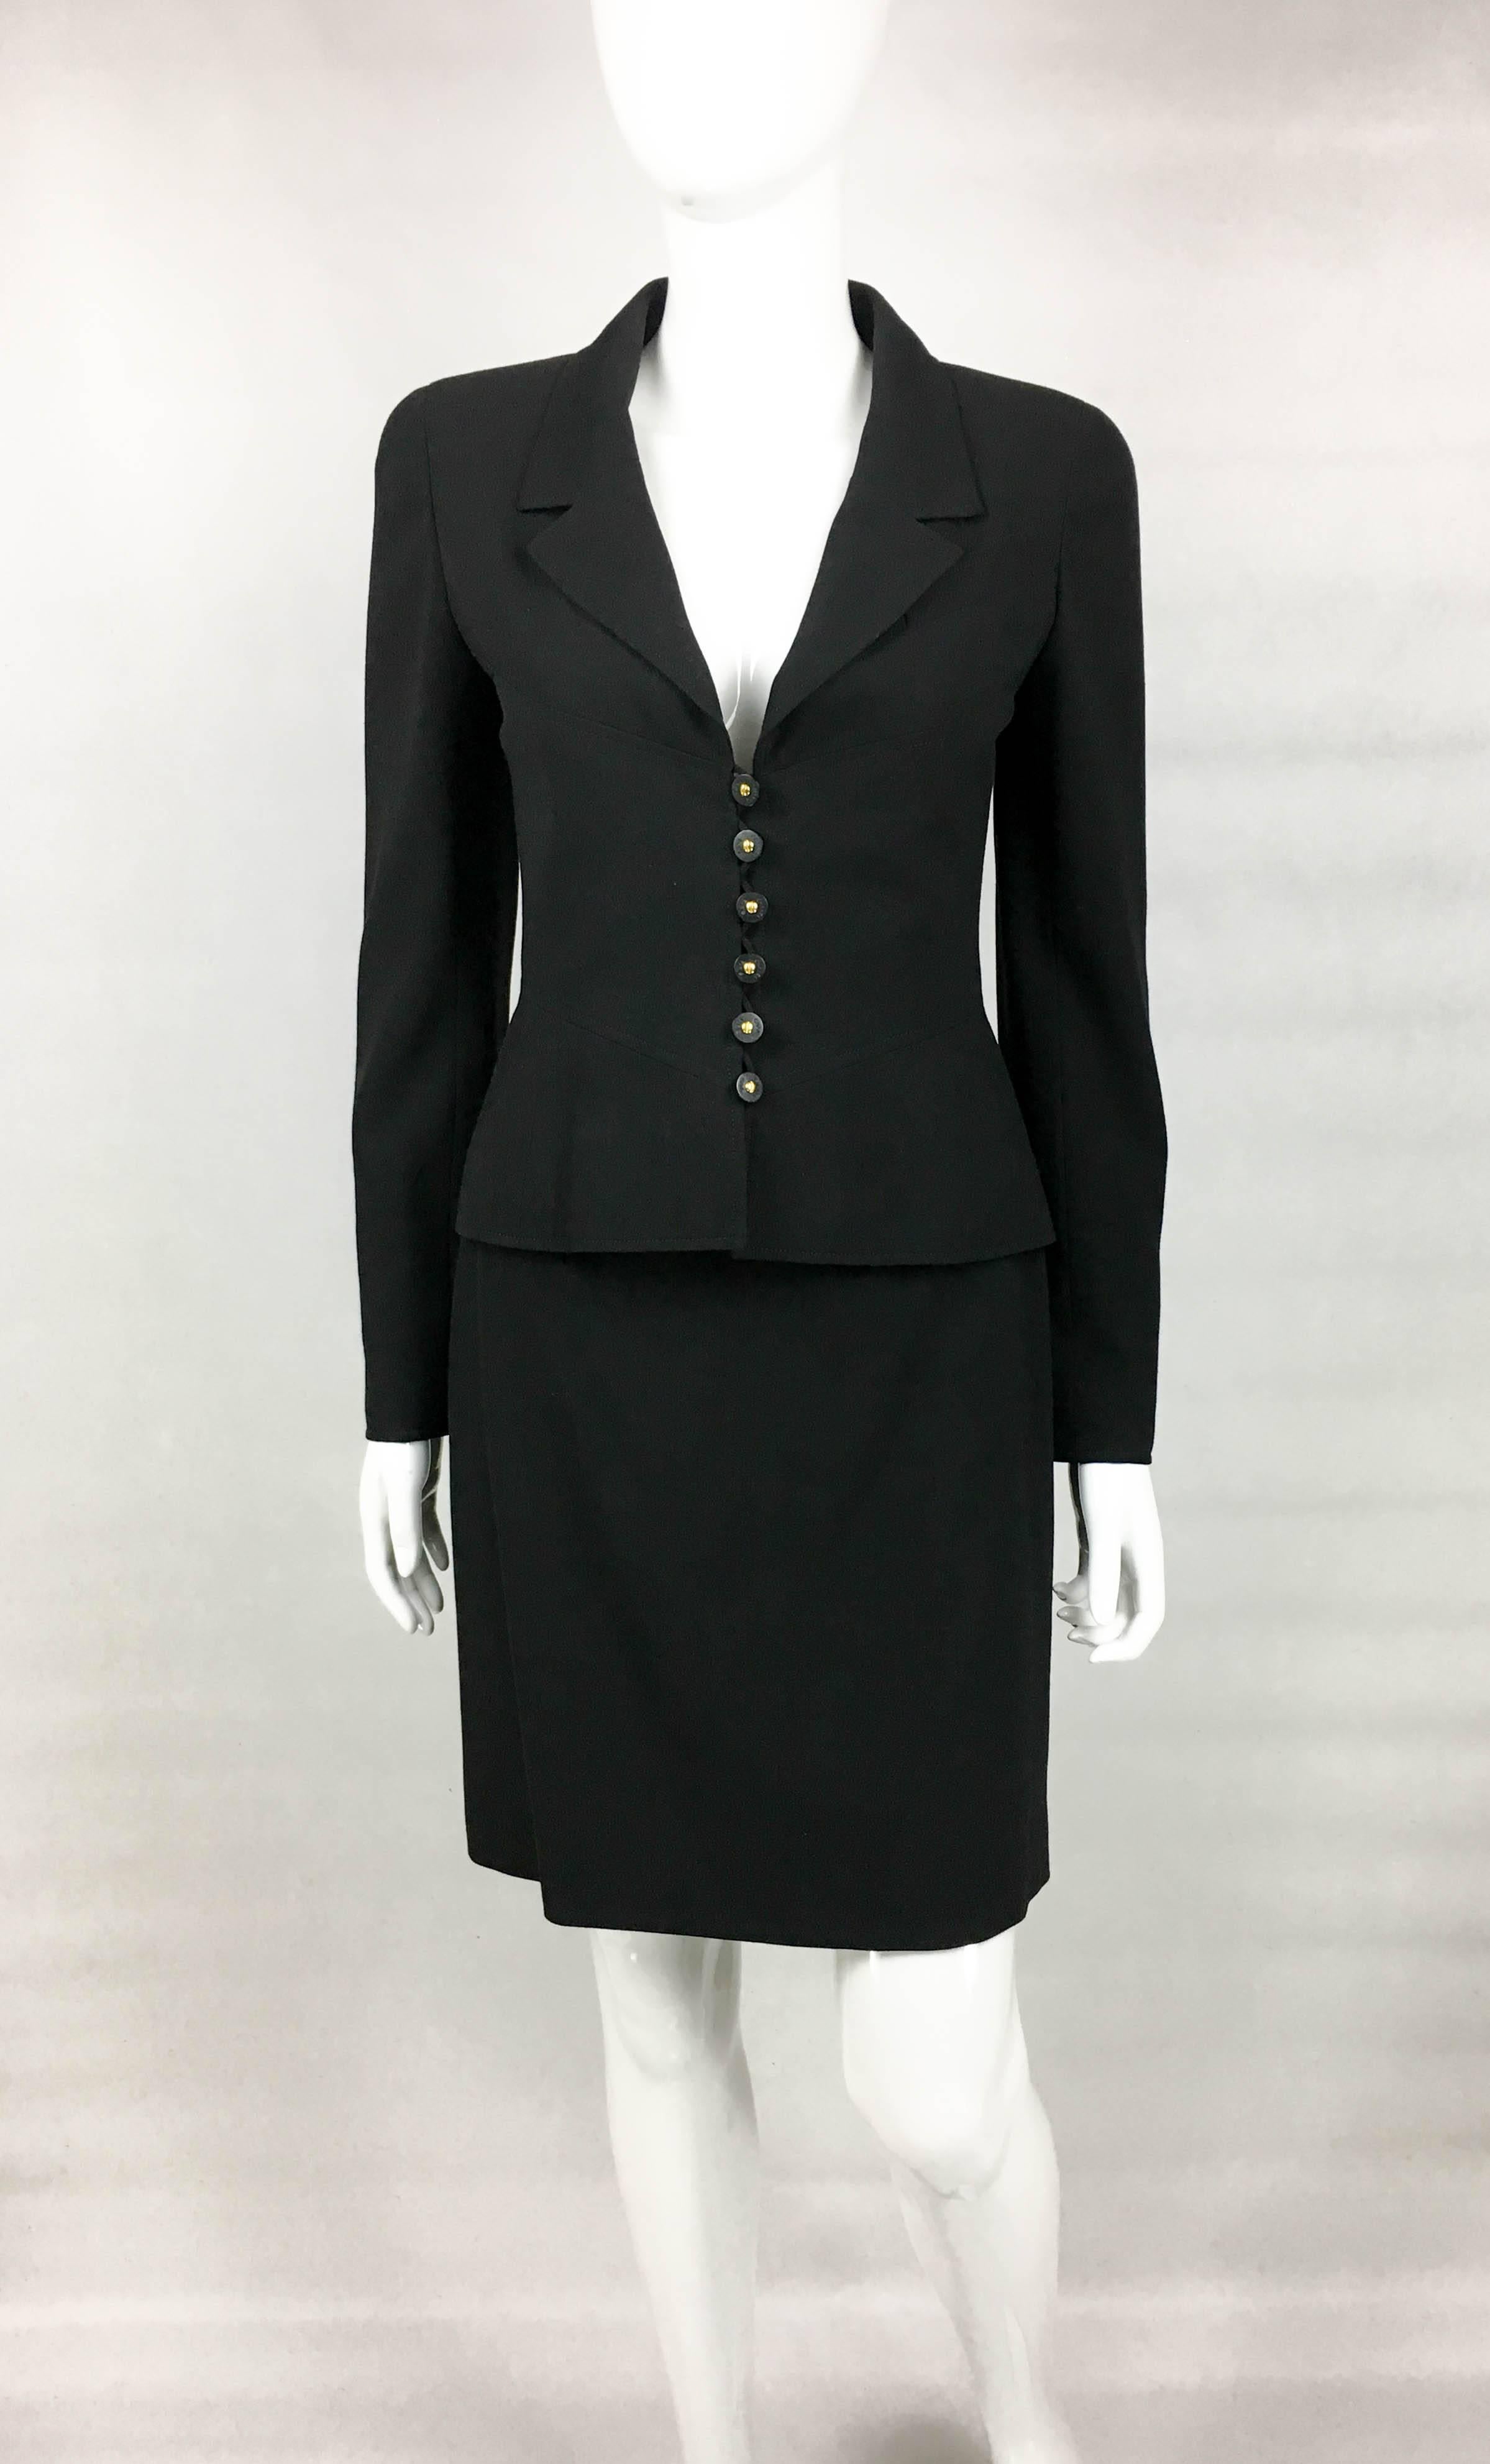 1997 Chanel Black Wool Skirt Suit In Excellent Condition For Sale In London, Chelsea